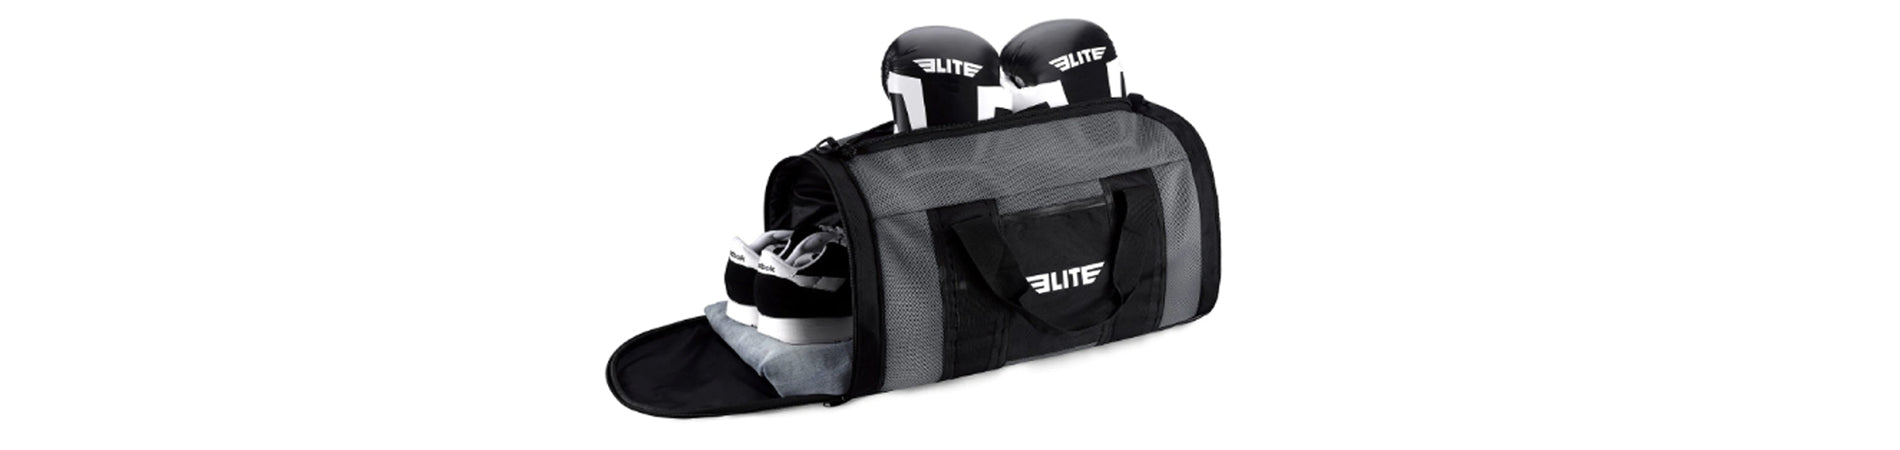 The Best Gear You’ll Need for Boxing Workouts at Home